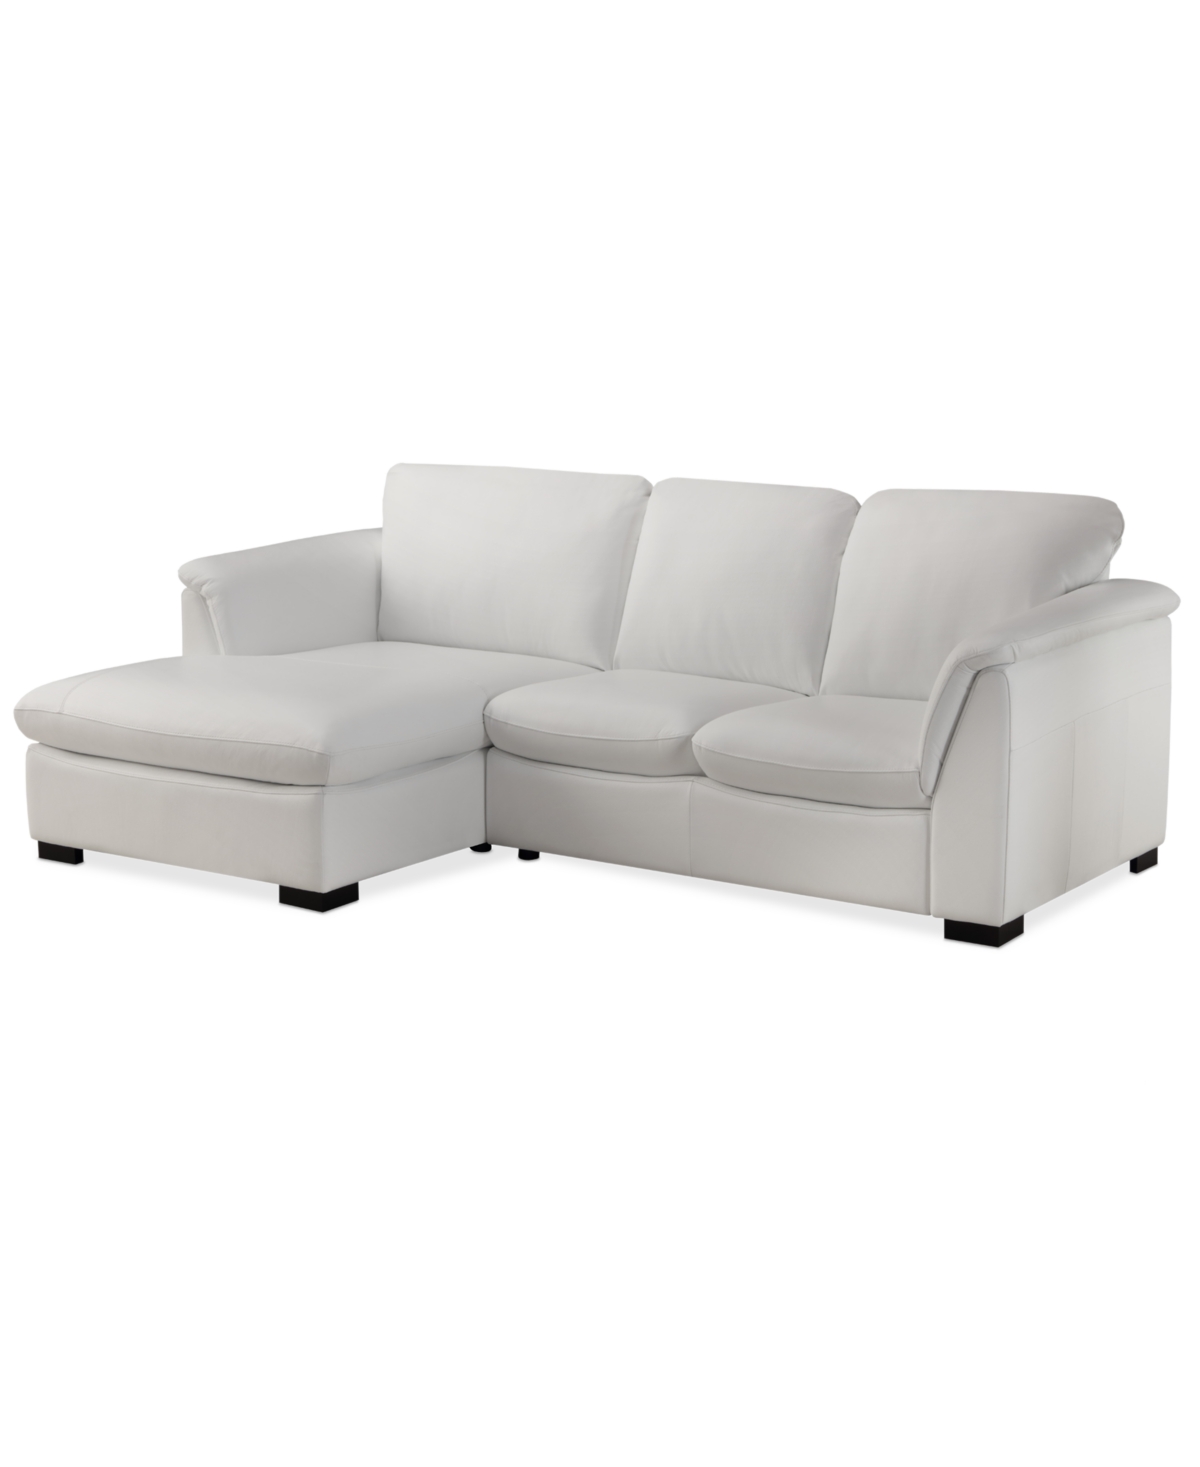 Furniture Arond 97" 2-pc. Leather Sectional With Chaise, Created For Macy's In White